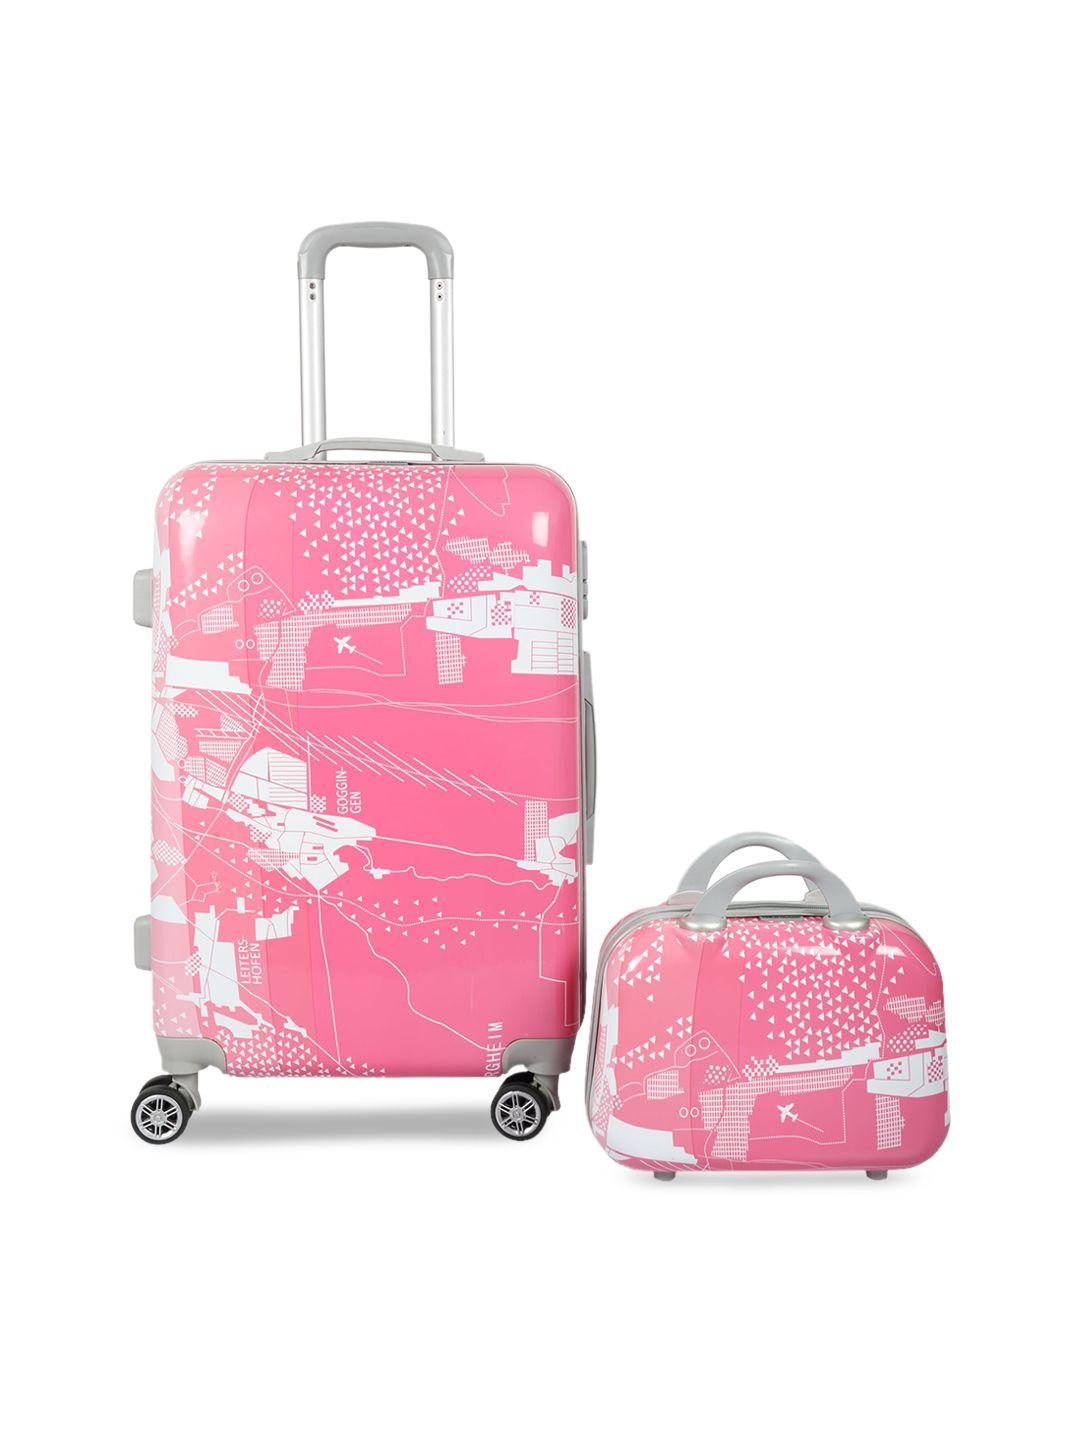 polo class trolley bag with vanity bag- 50 cm